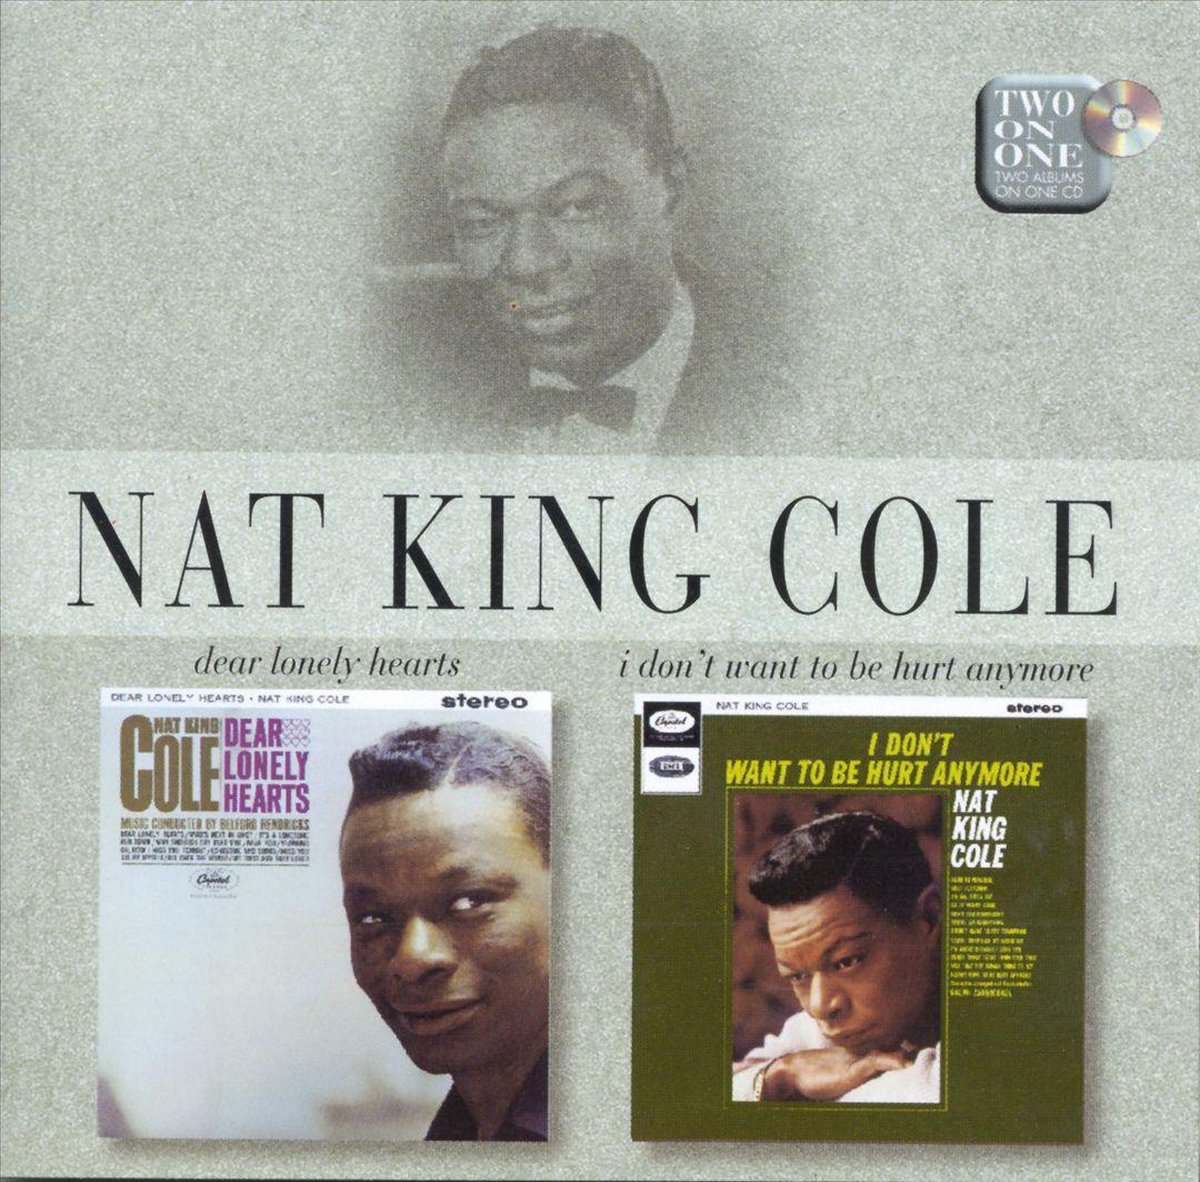 Dear Lonely Hearts/I Don't Want To Be Hurt Anymore - Nat King Cole